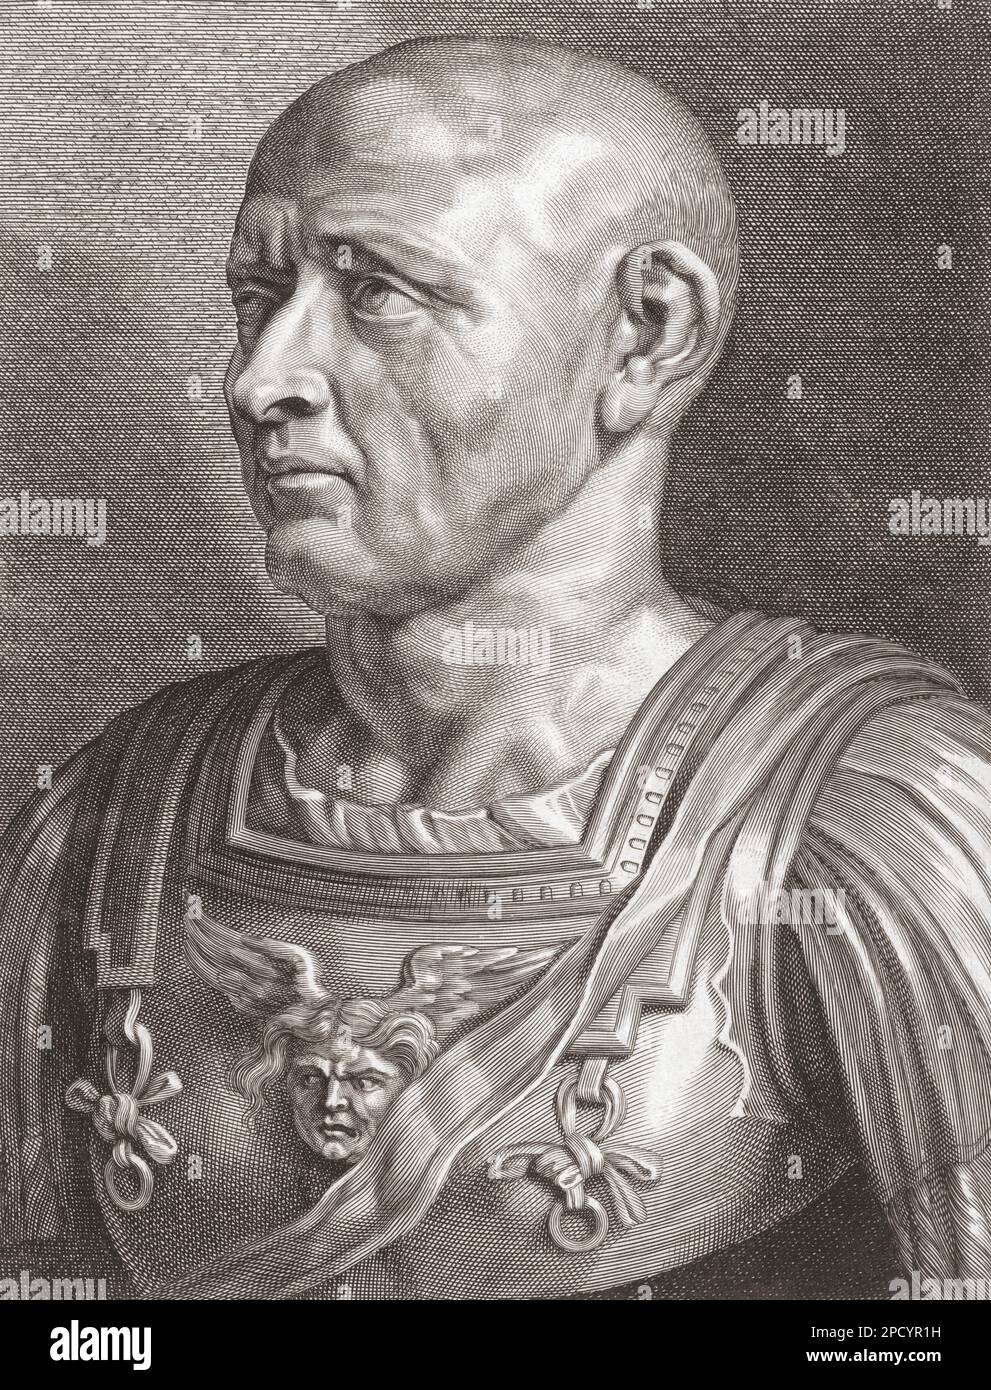 Publius Cornelius Scipio Africanus, c.235 BC - 183 BC.  Roman general who defeated Hannibal in the Second Punic War.  From an engraving by Paulus Pontius after the work by Peter Paul Rubens. Stock Photo